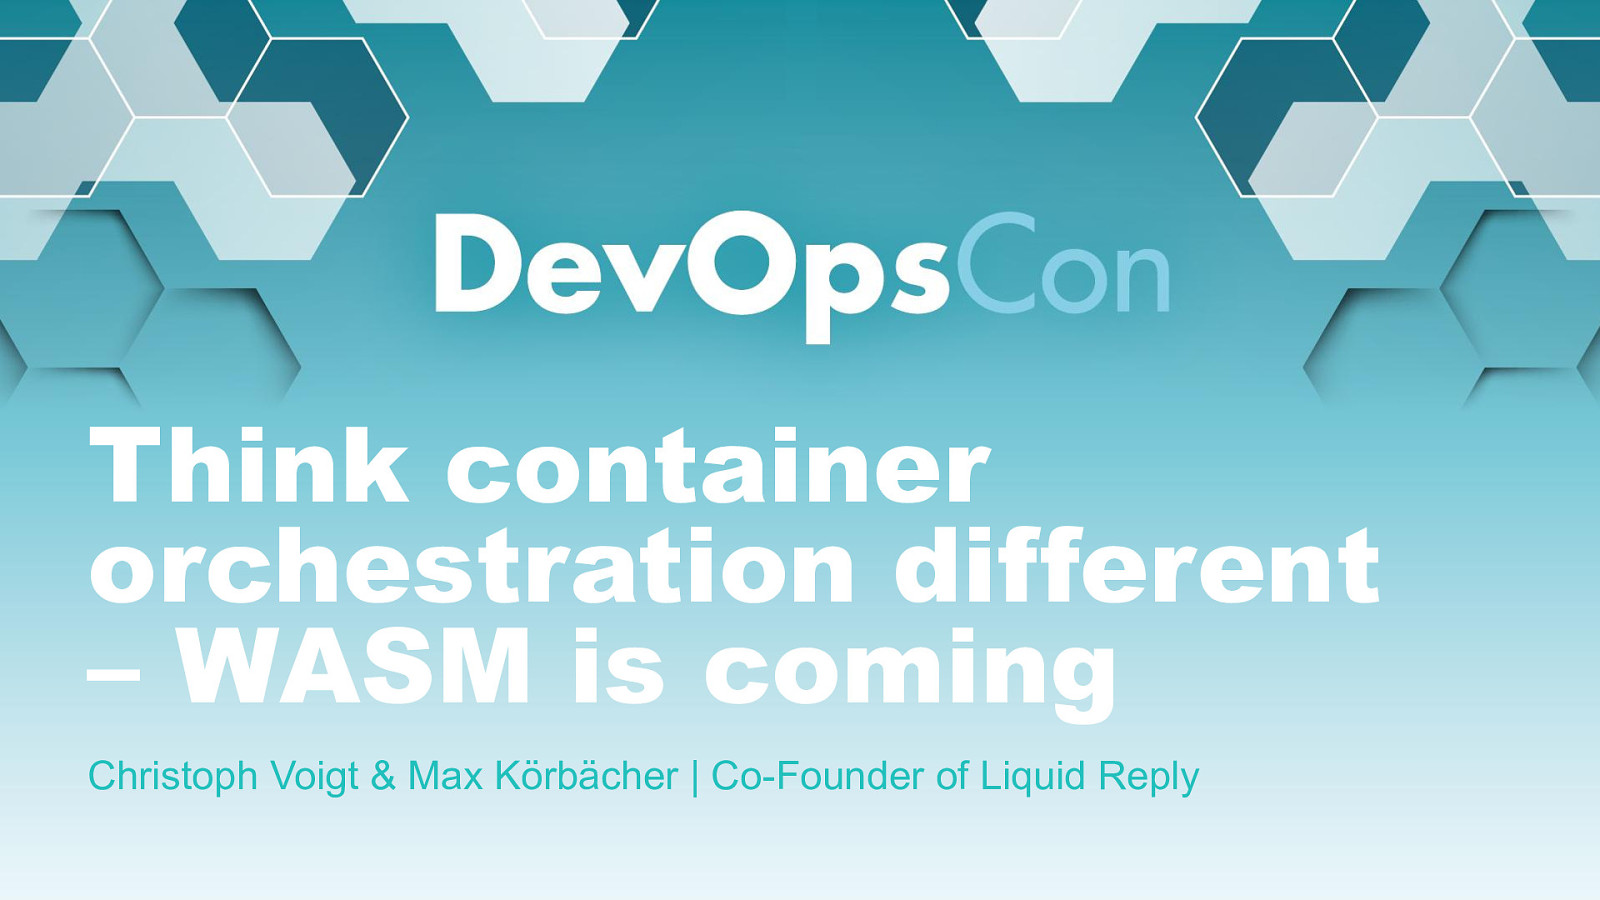  Think container orchestration different – WASM is coming